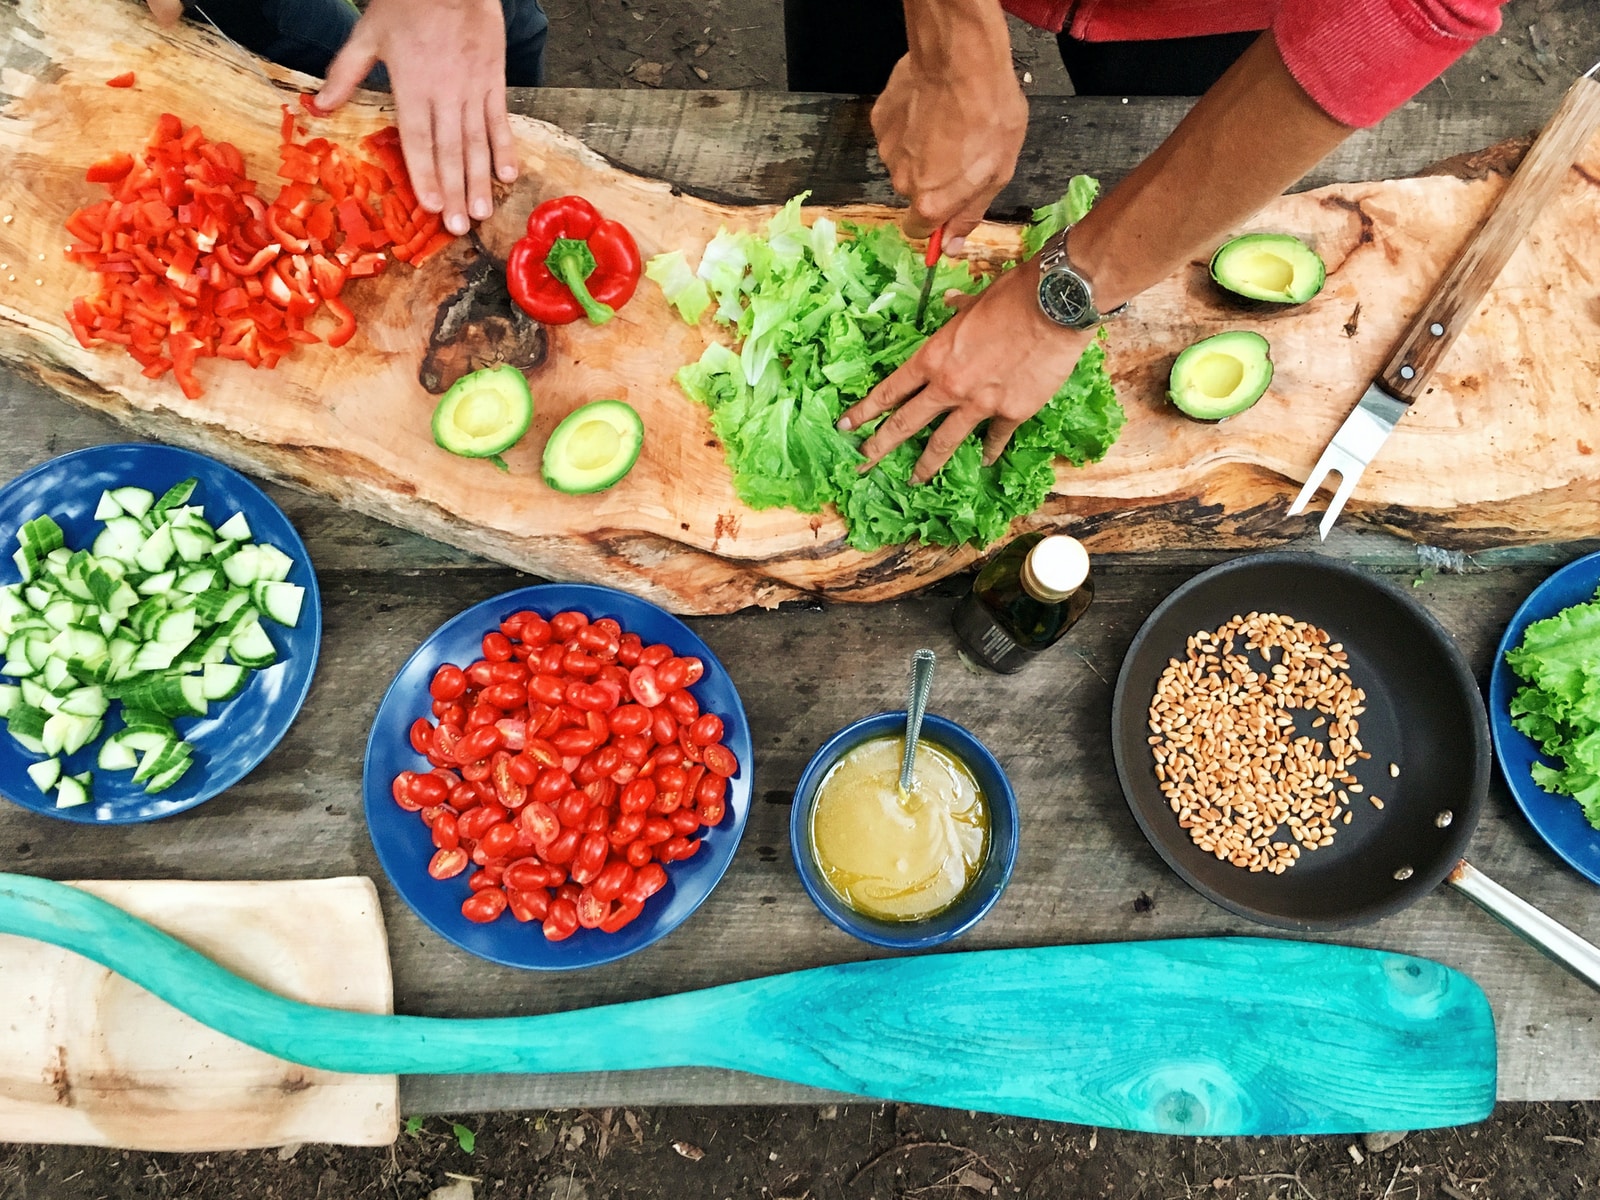 nutritionist cooking Food Groups Eating Habits Outdoor Kitchen person slicing green vegetable in front of round ceramic plates with assorted sliced vegetables during daytime